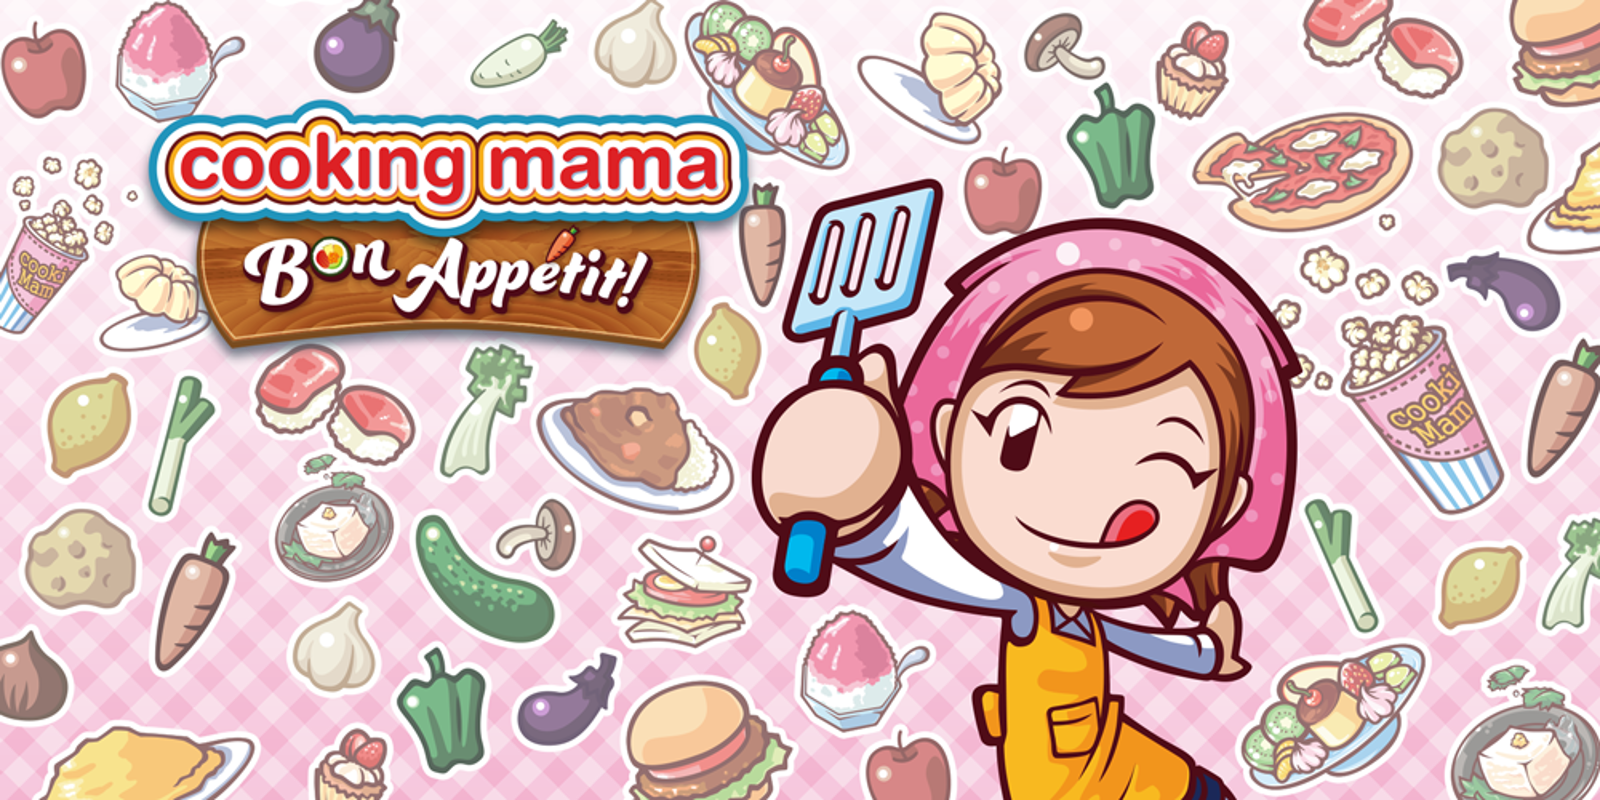 official art for game cooking mama bon appetit